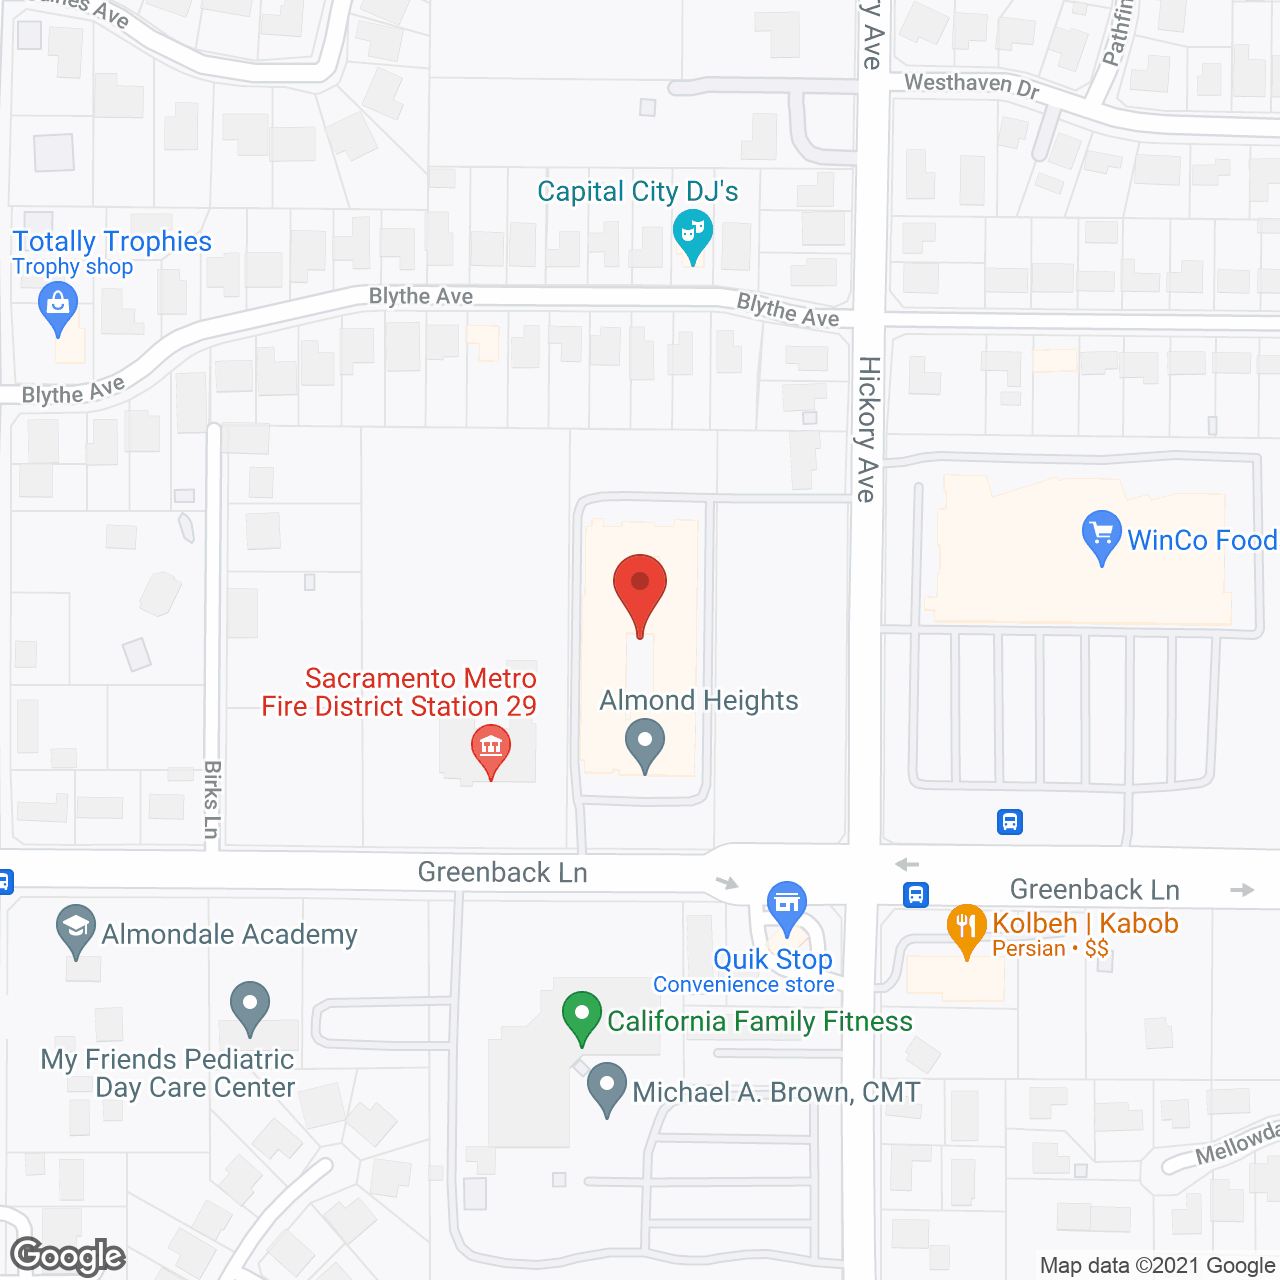 Almond Heights Senior Living in google map